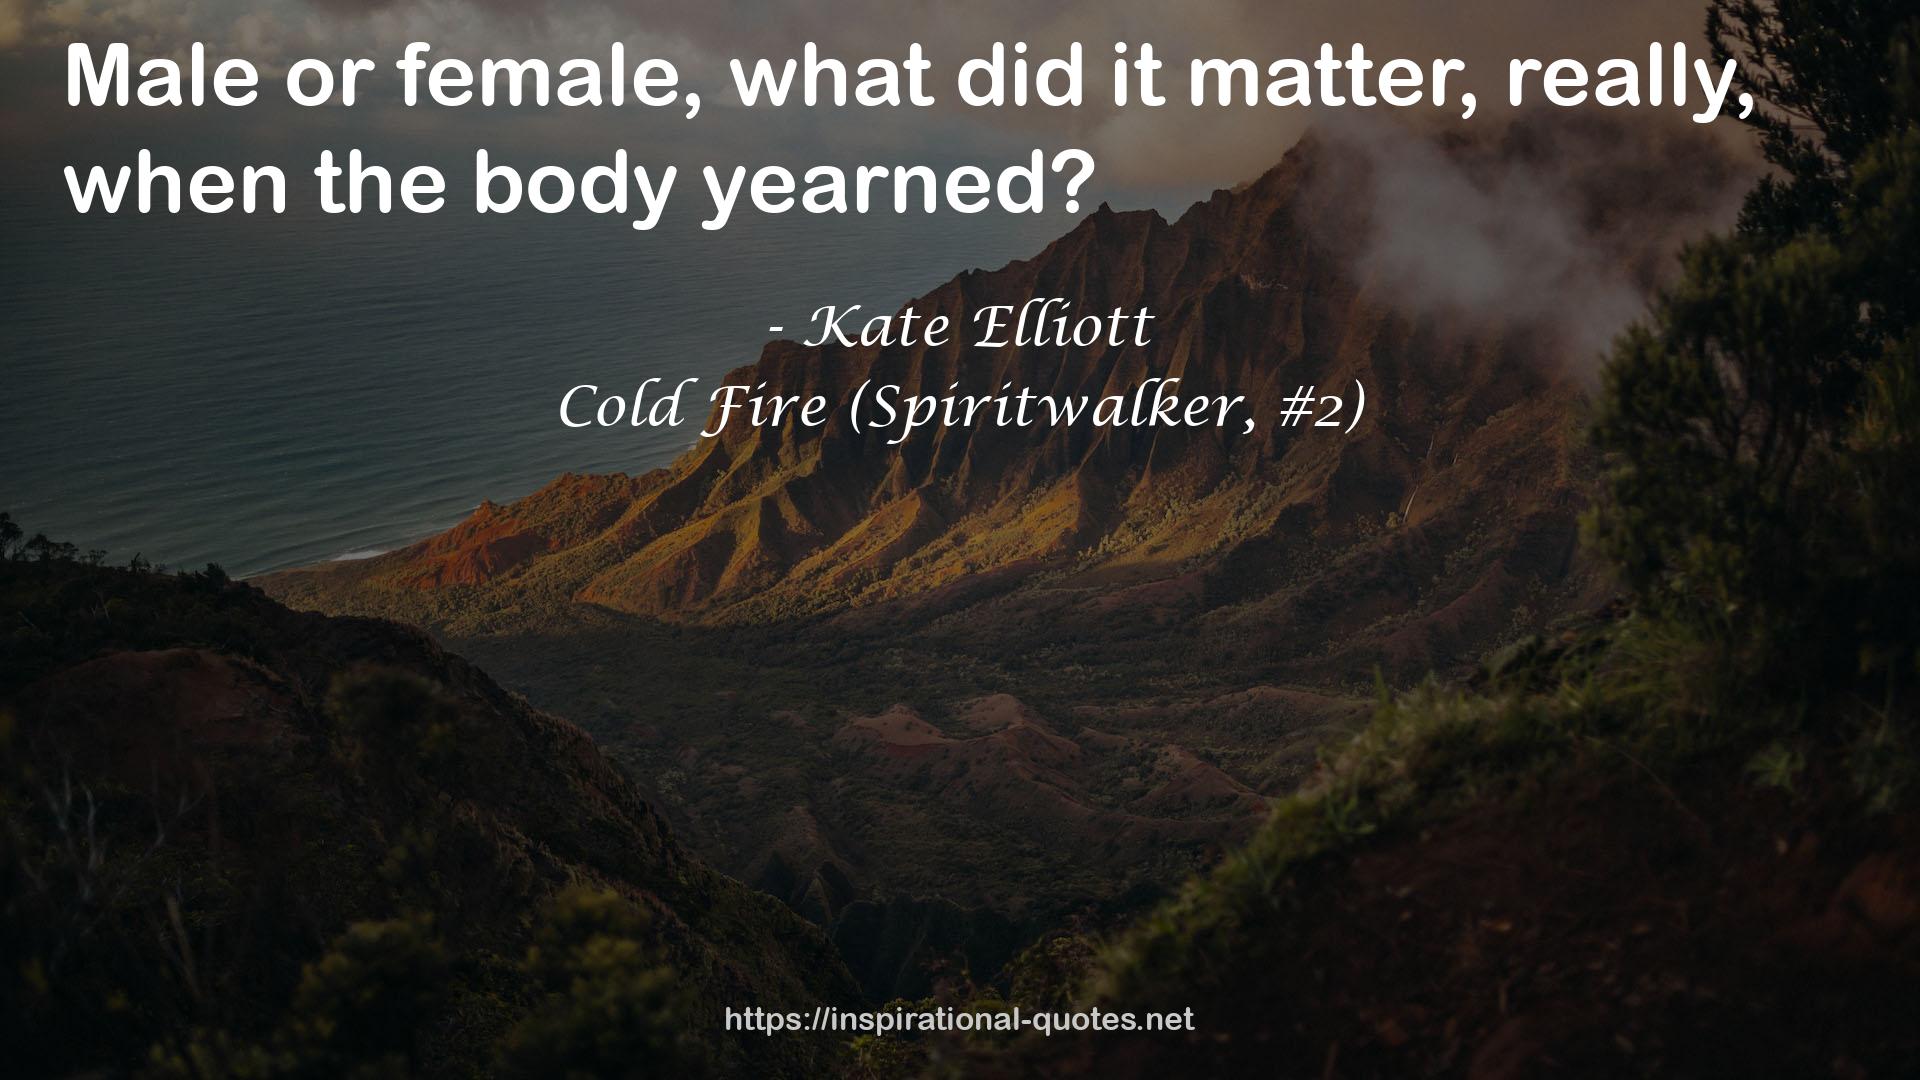 Cold Fire (Spiritwalker, #2) QUOTES